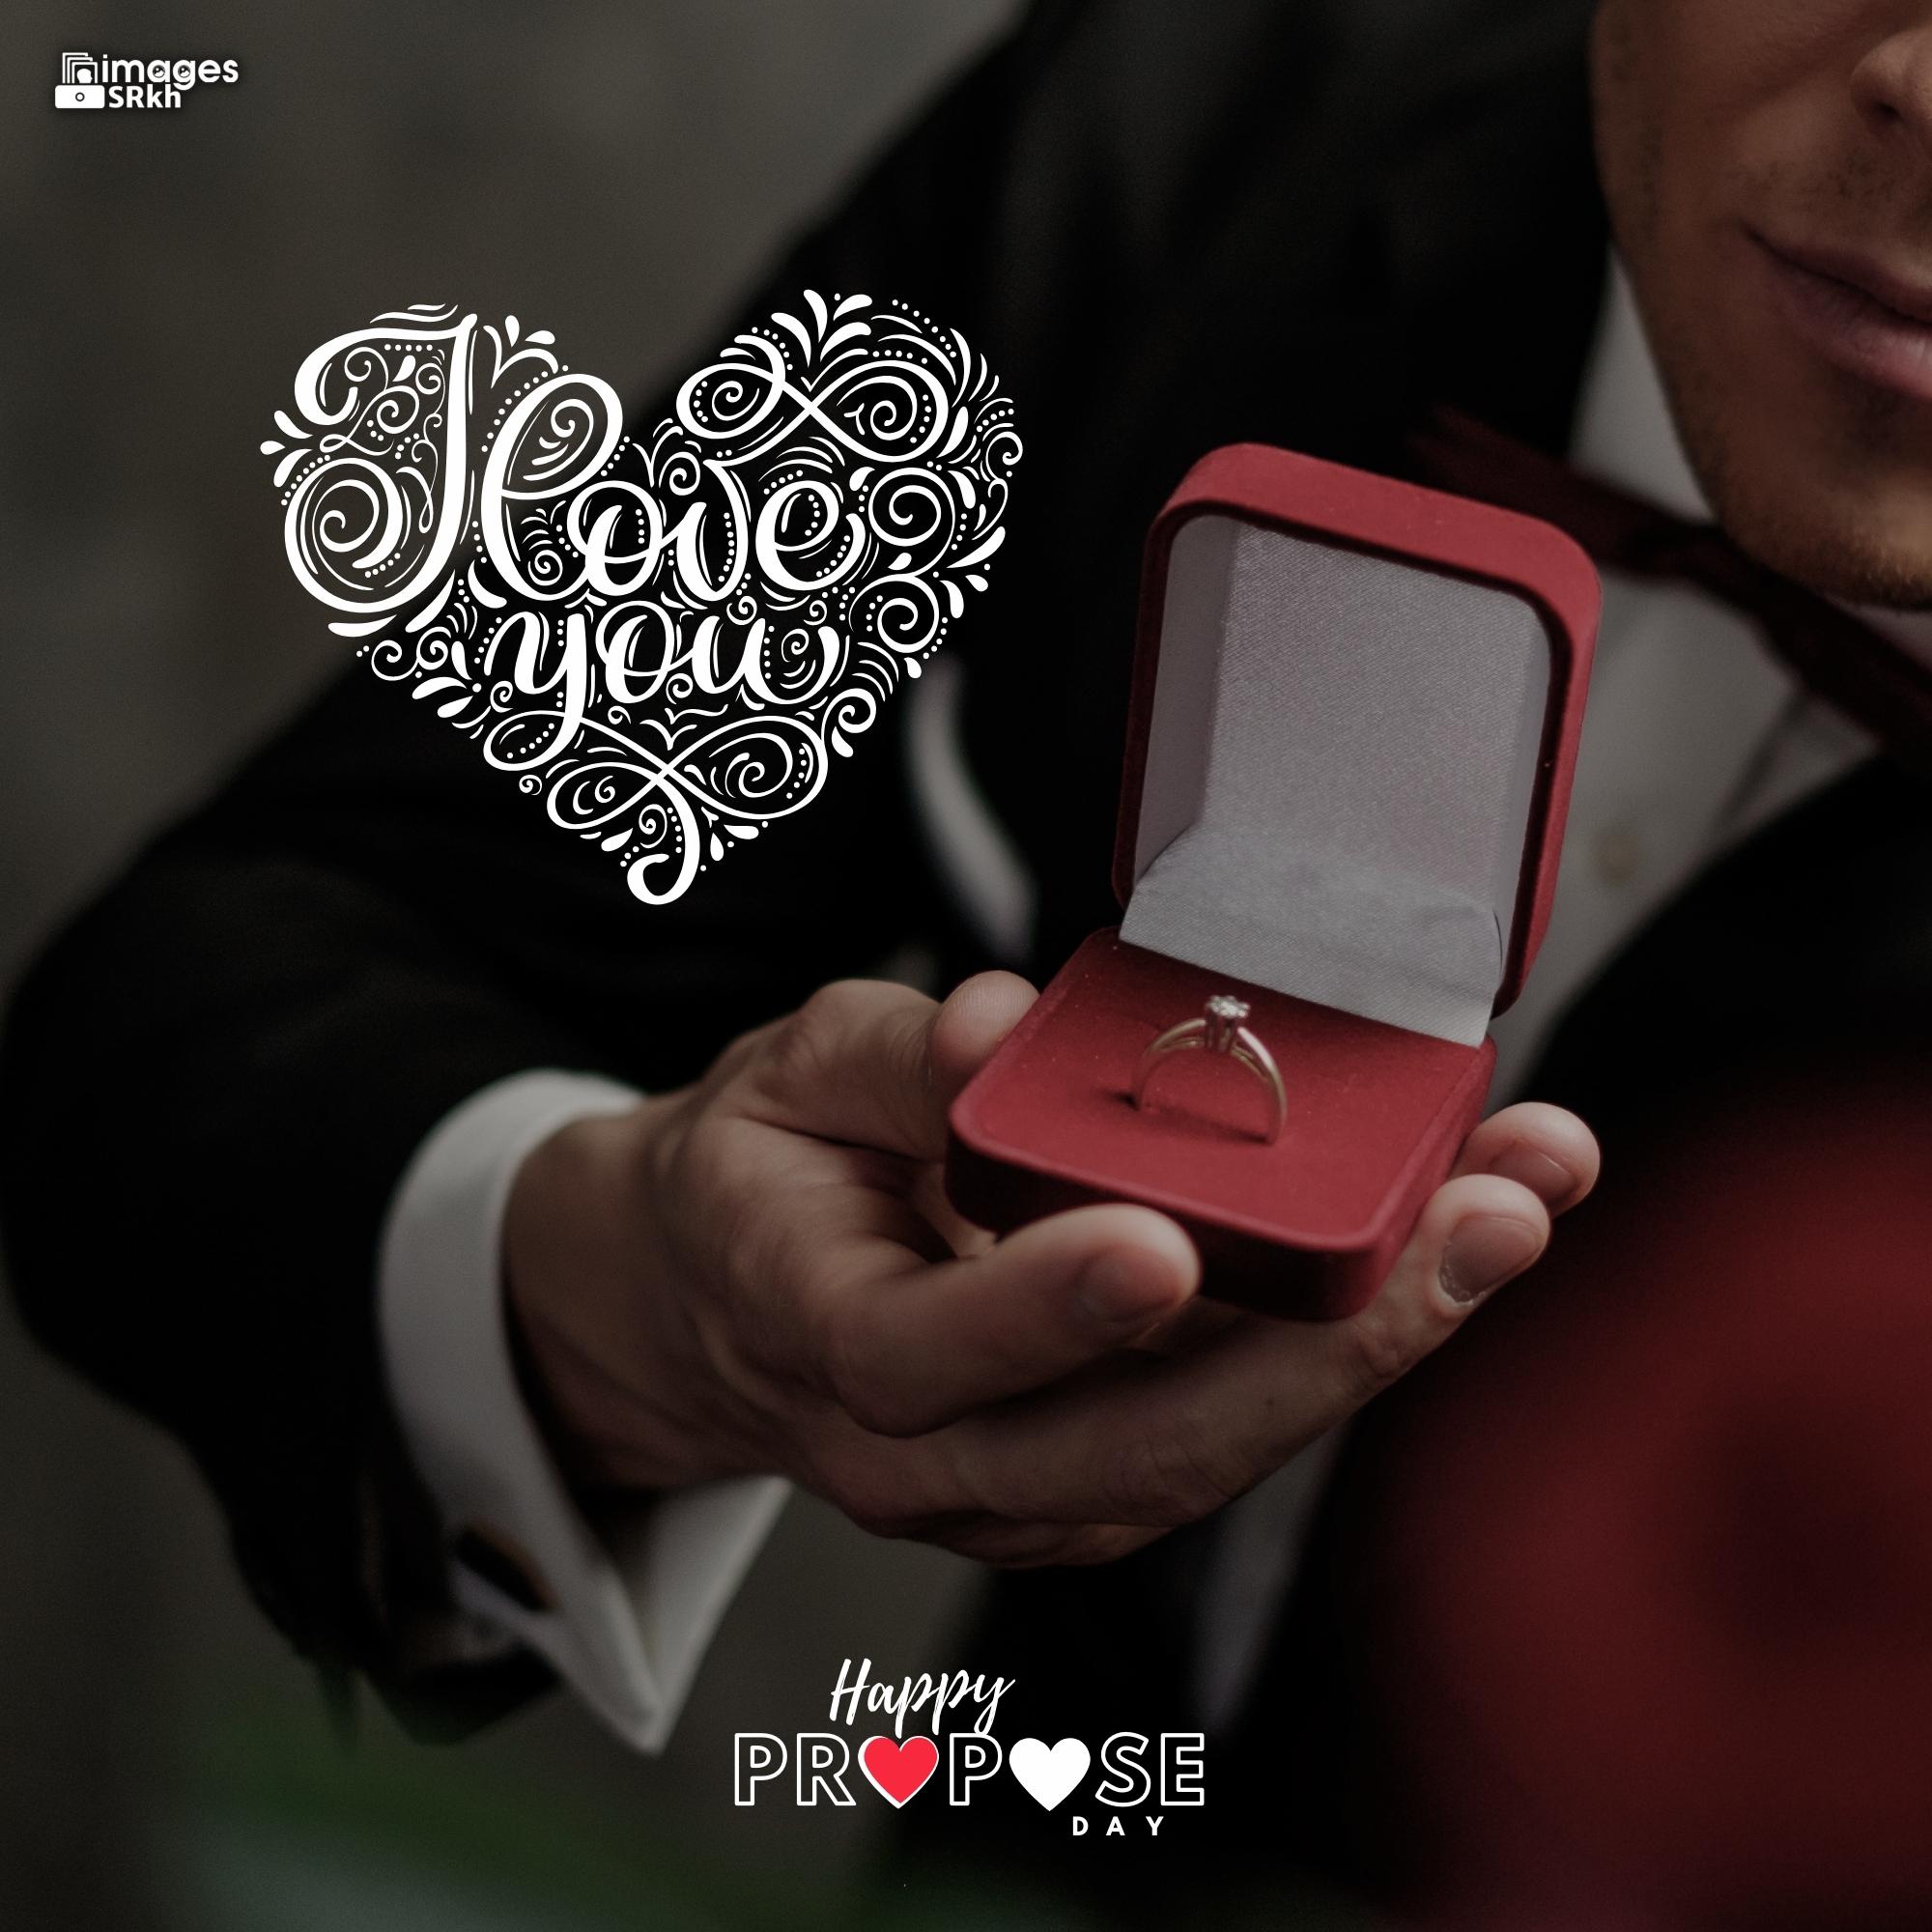 Happy Propose Day Images | 307 | I LOVE YOU